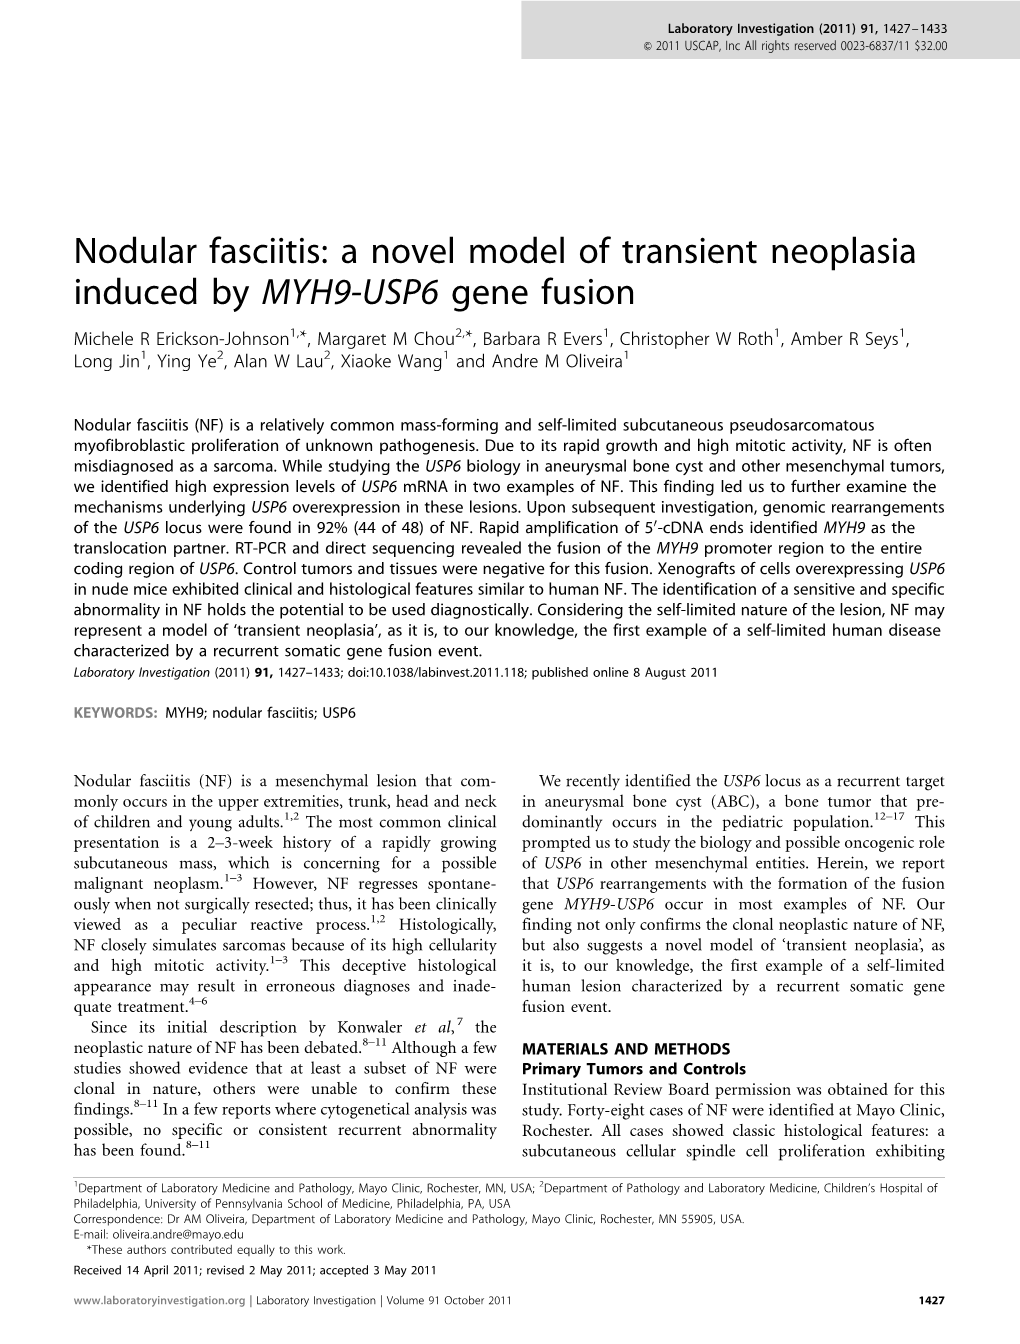 Nodular Fasciitis: a Novel Model of Transient Neoplasia Induced by MYH9-USP6 Gene Fusion